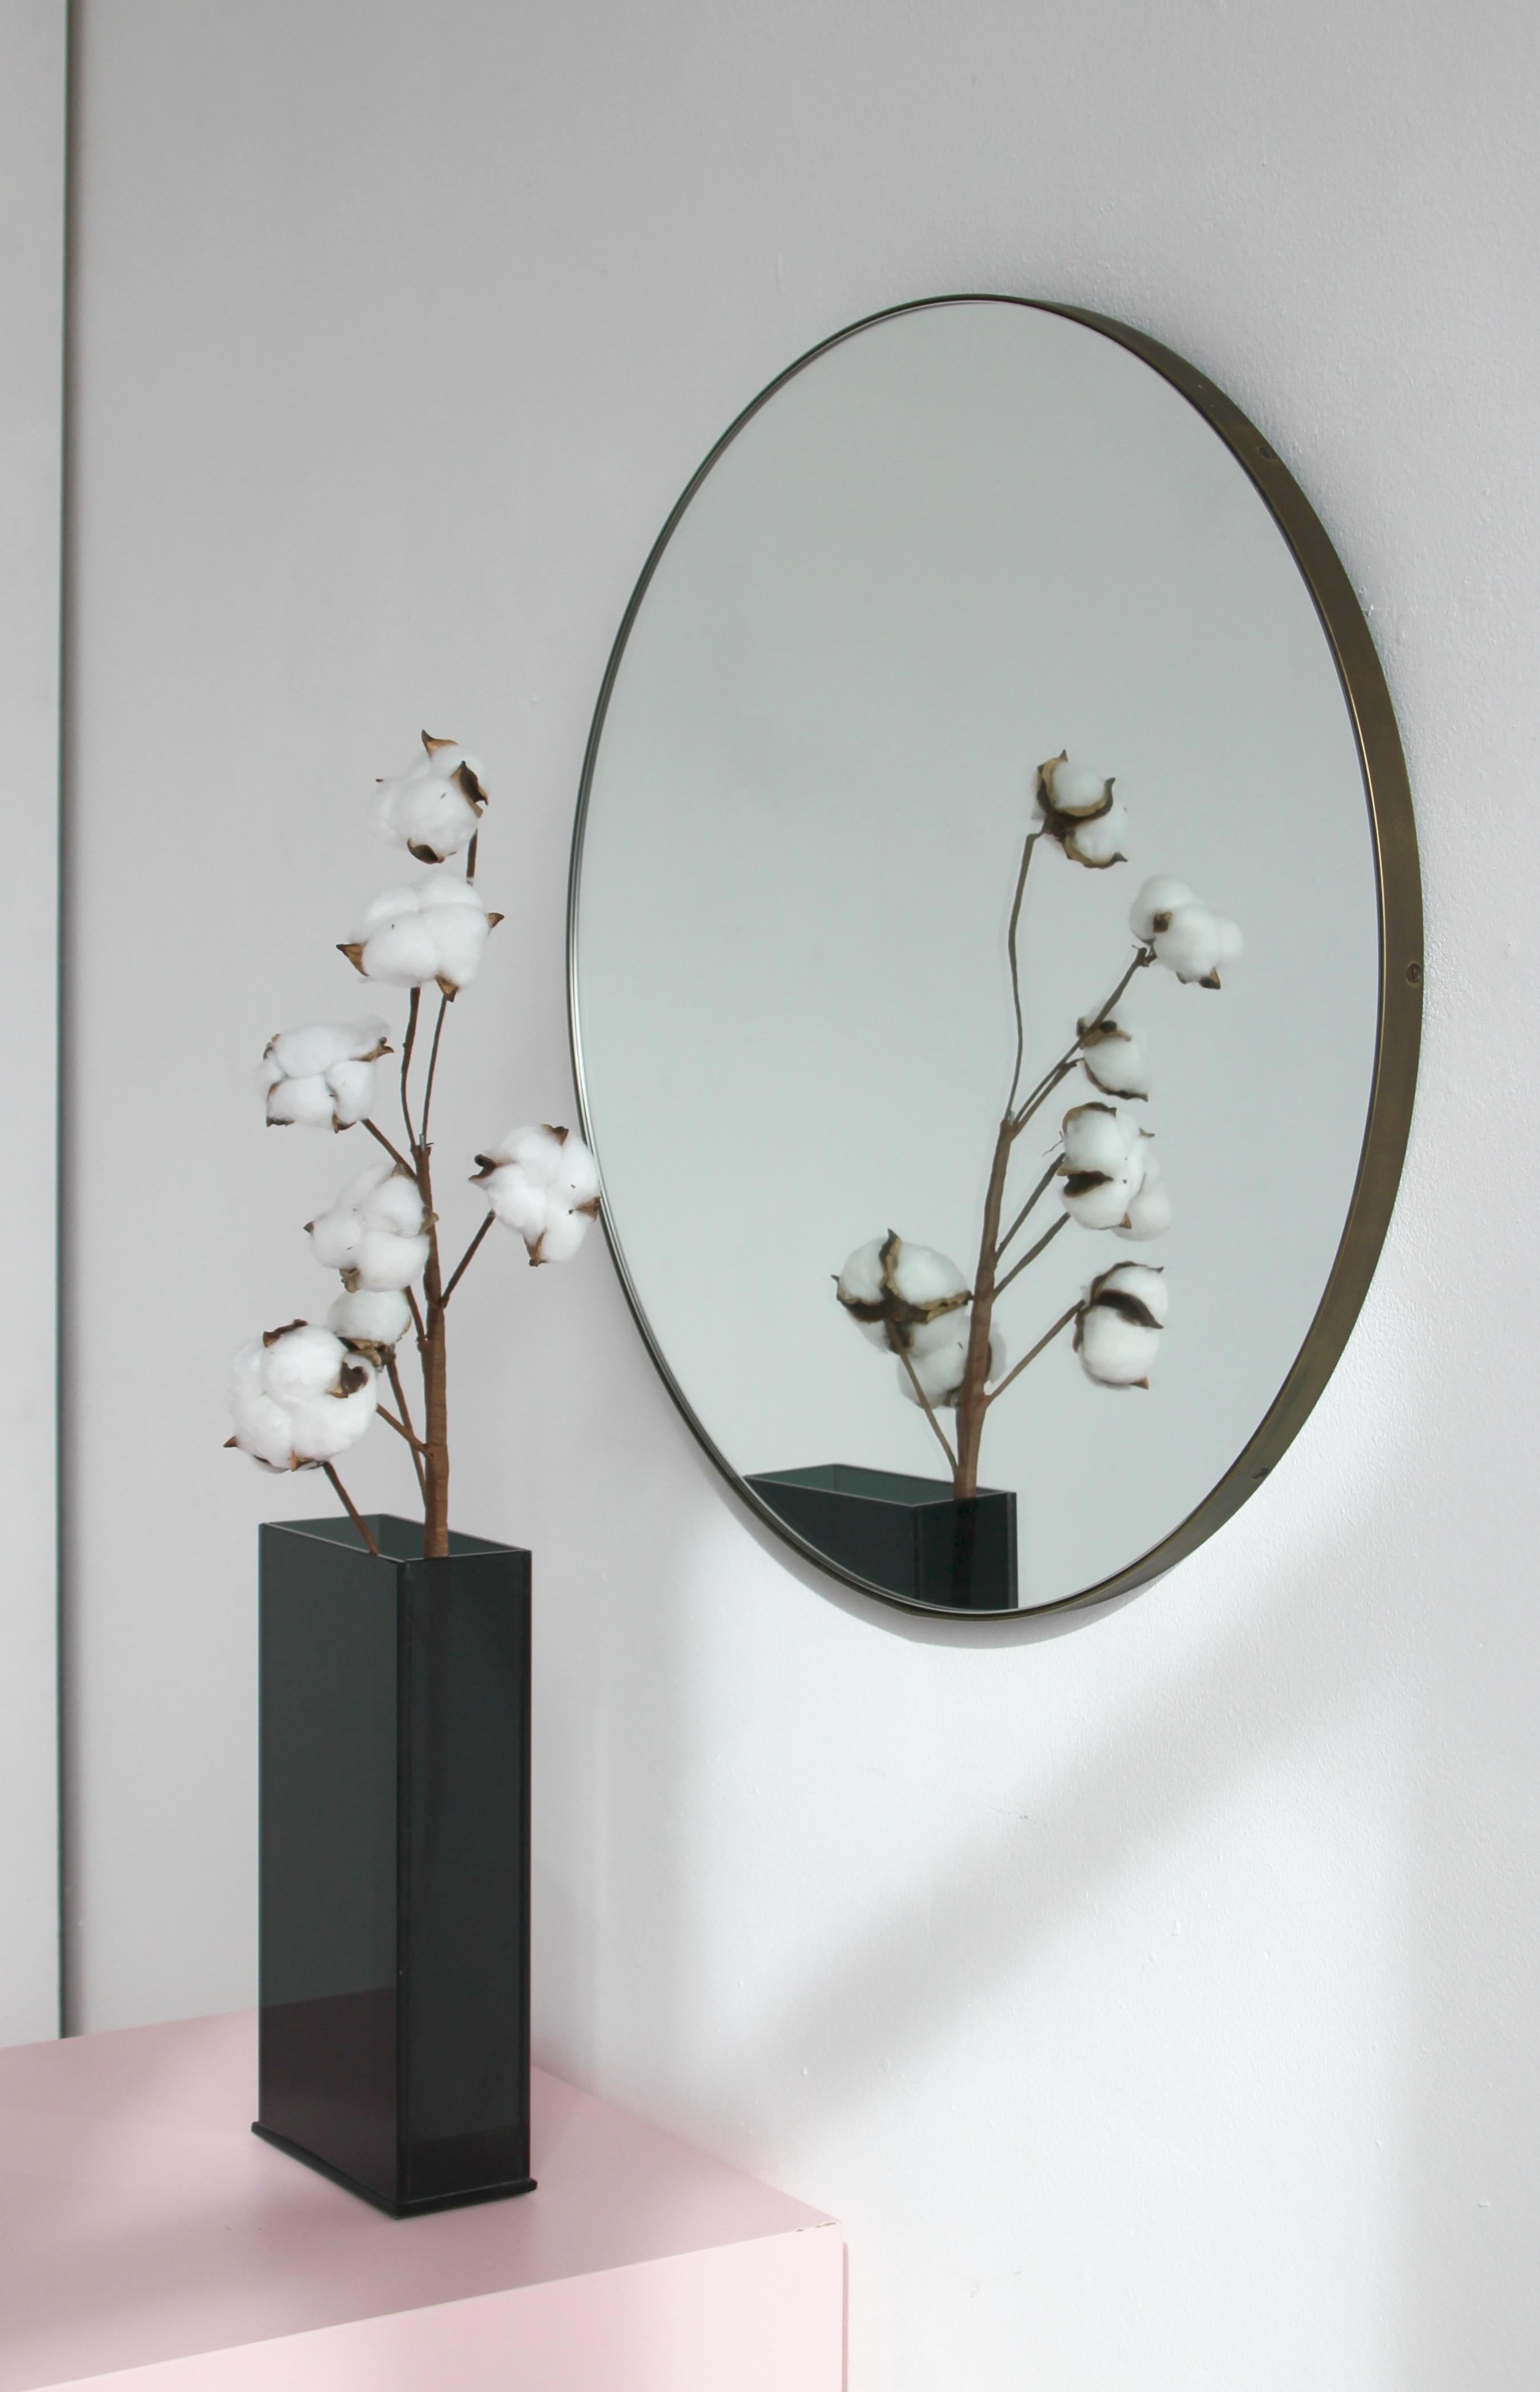 Minimalist round mirror with an elegant bronze patina brass frame. Designed and handcrafted in London, UK.

Fitted with a brass hook or an aluminium z-bar depending on the size of the mirror. Also available on demand with a split batten system to